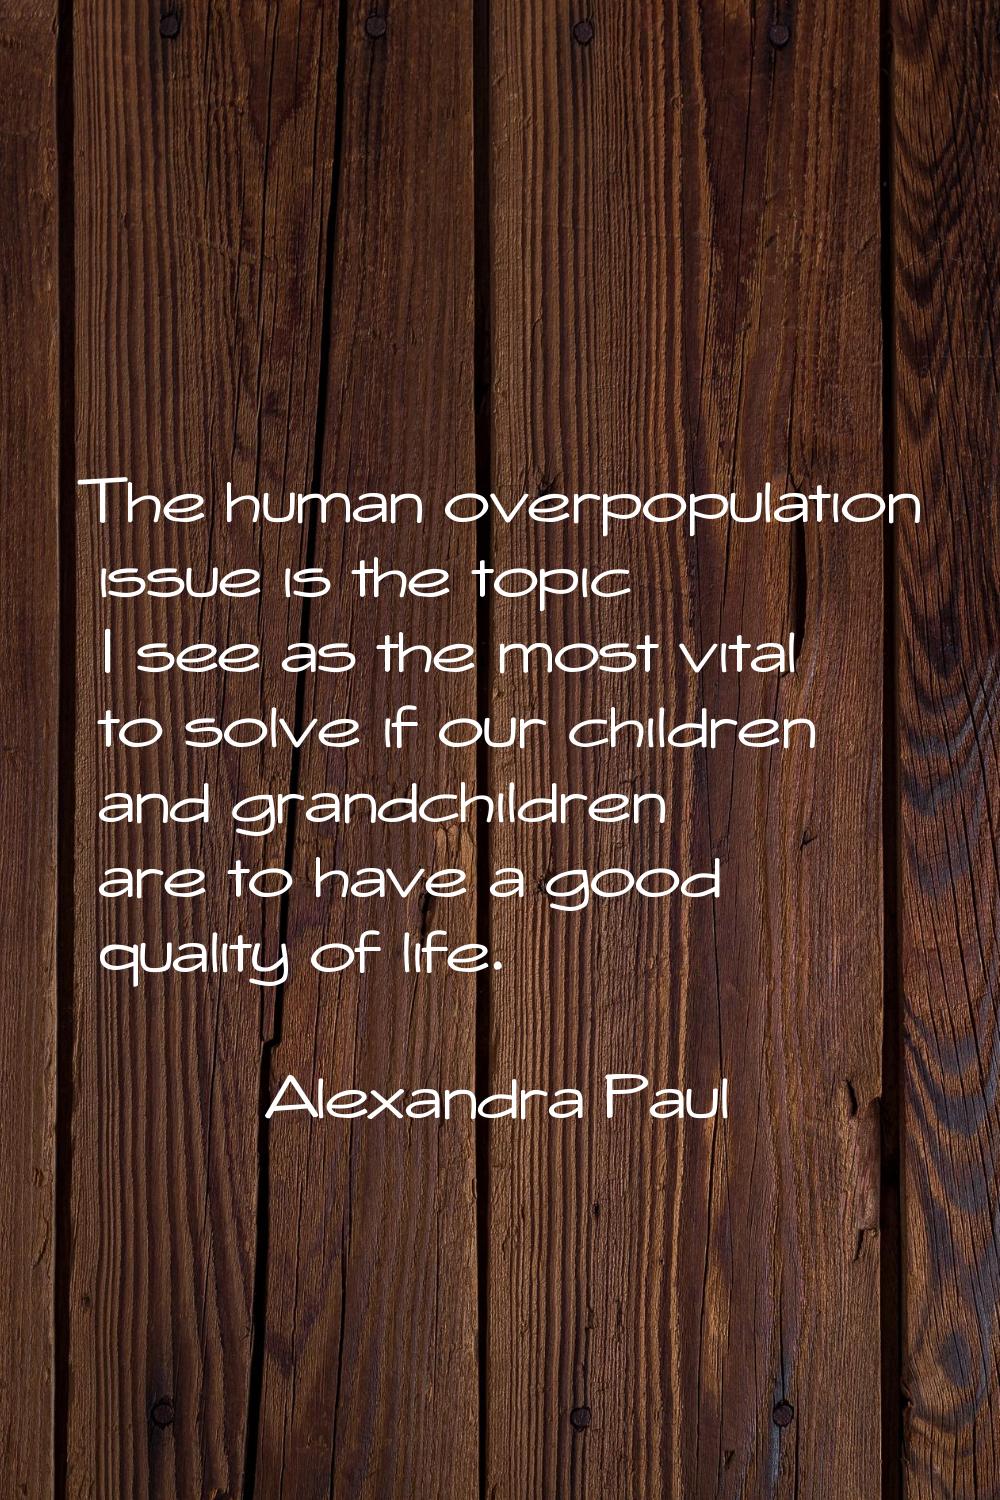 The human overpopulation issue is the topic I see as the most vital to solve if our children and gr